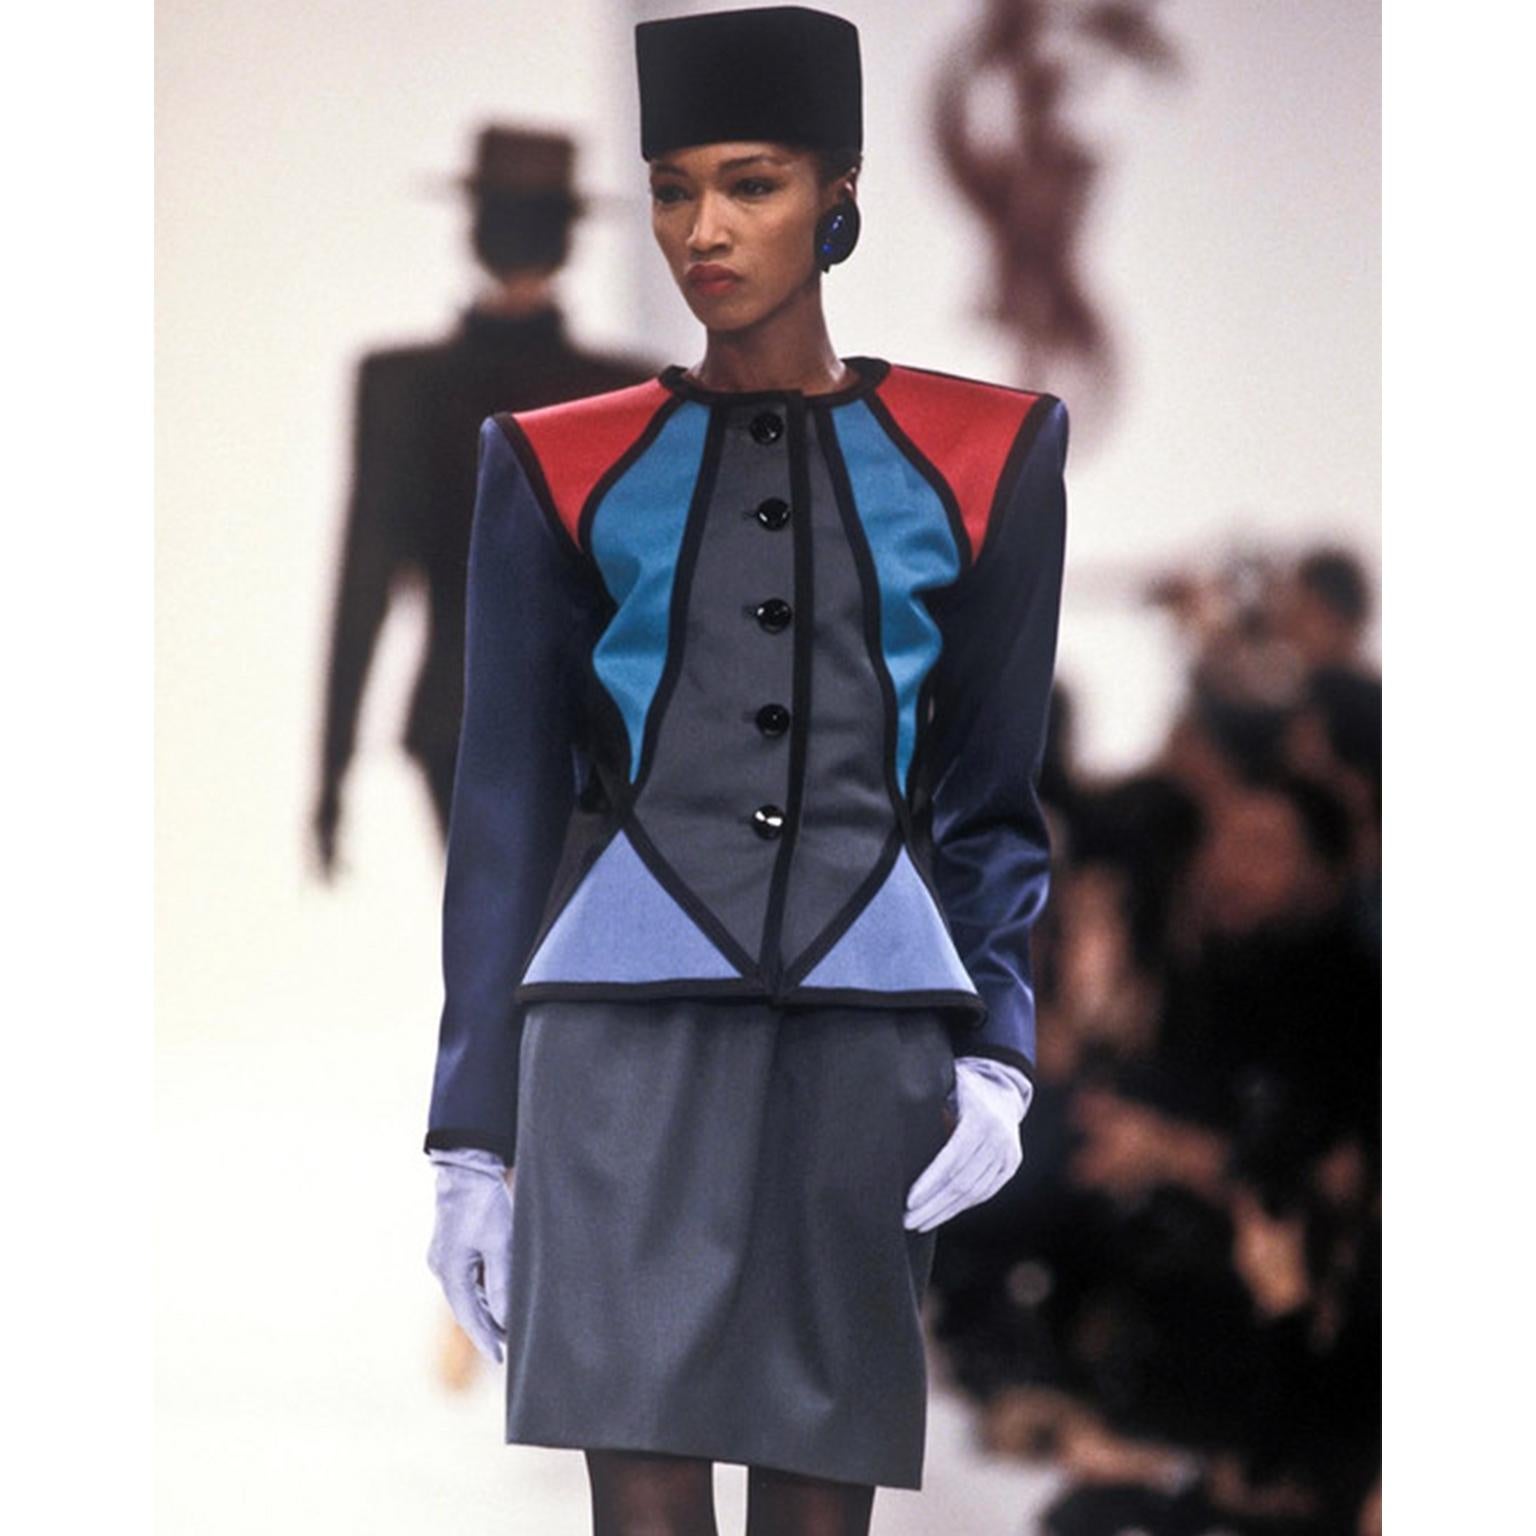 This is a truly stunning vintage Yves Saint Laurent Rive Gauche jewel tone color block jacket and skirt suit. The blazer style jacket is constructed with geometric panels in shades of teal, burgundy red, green, and blue. This gorgeous vintage suit